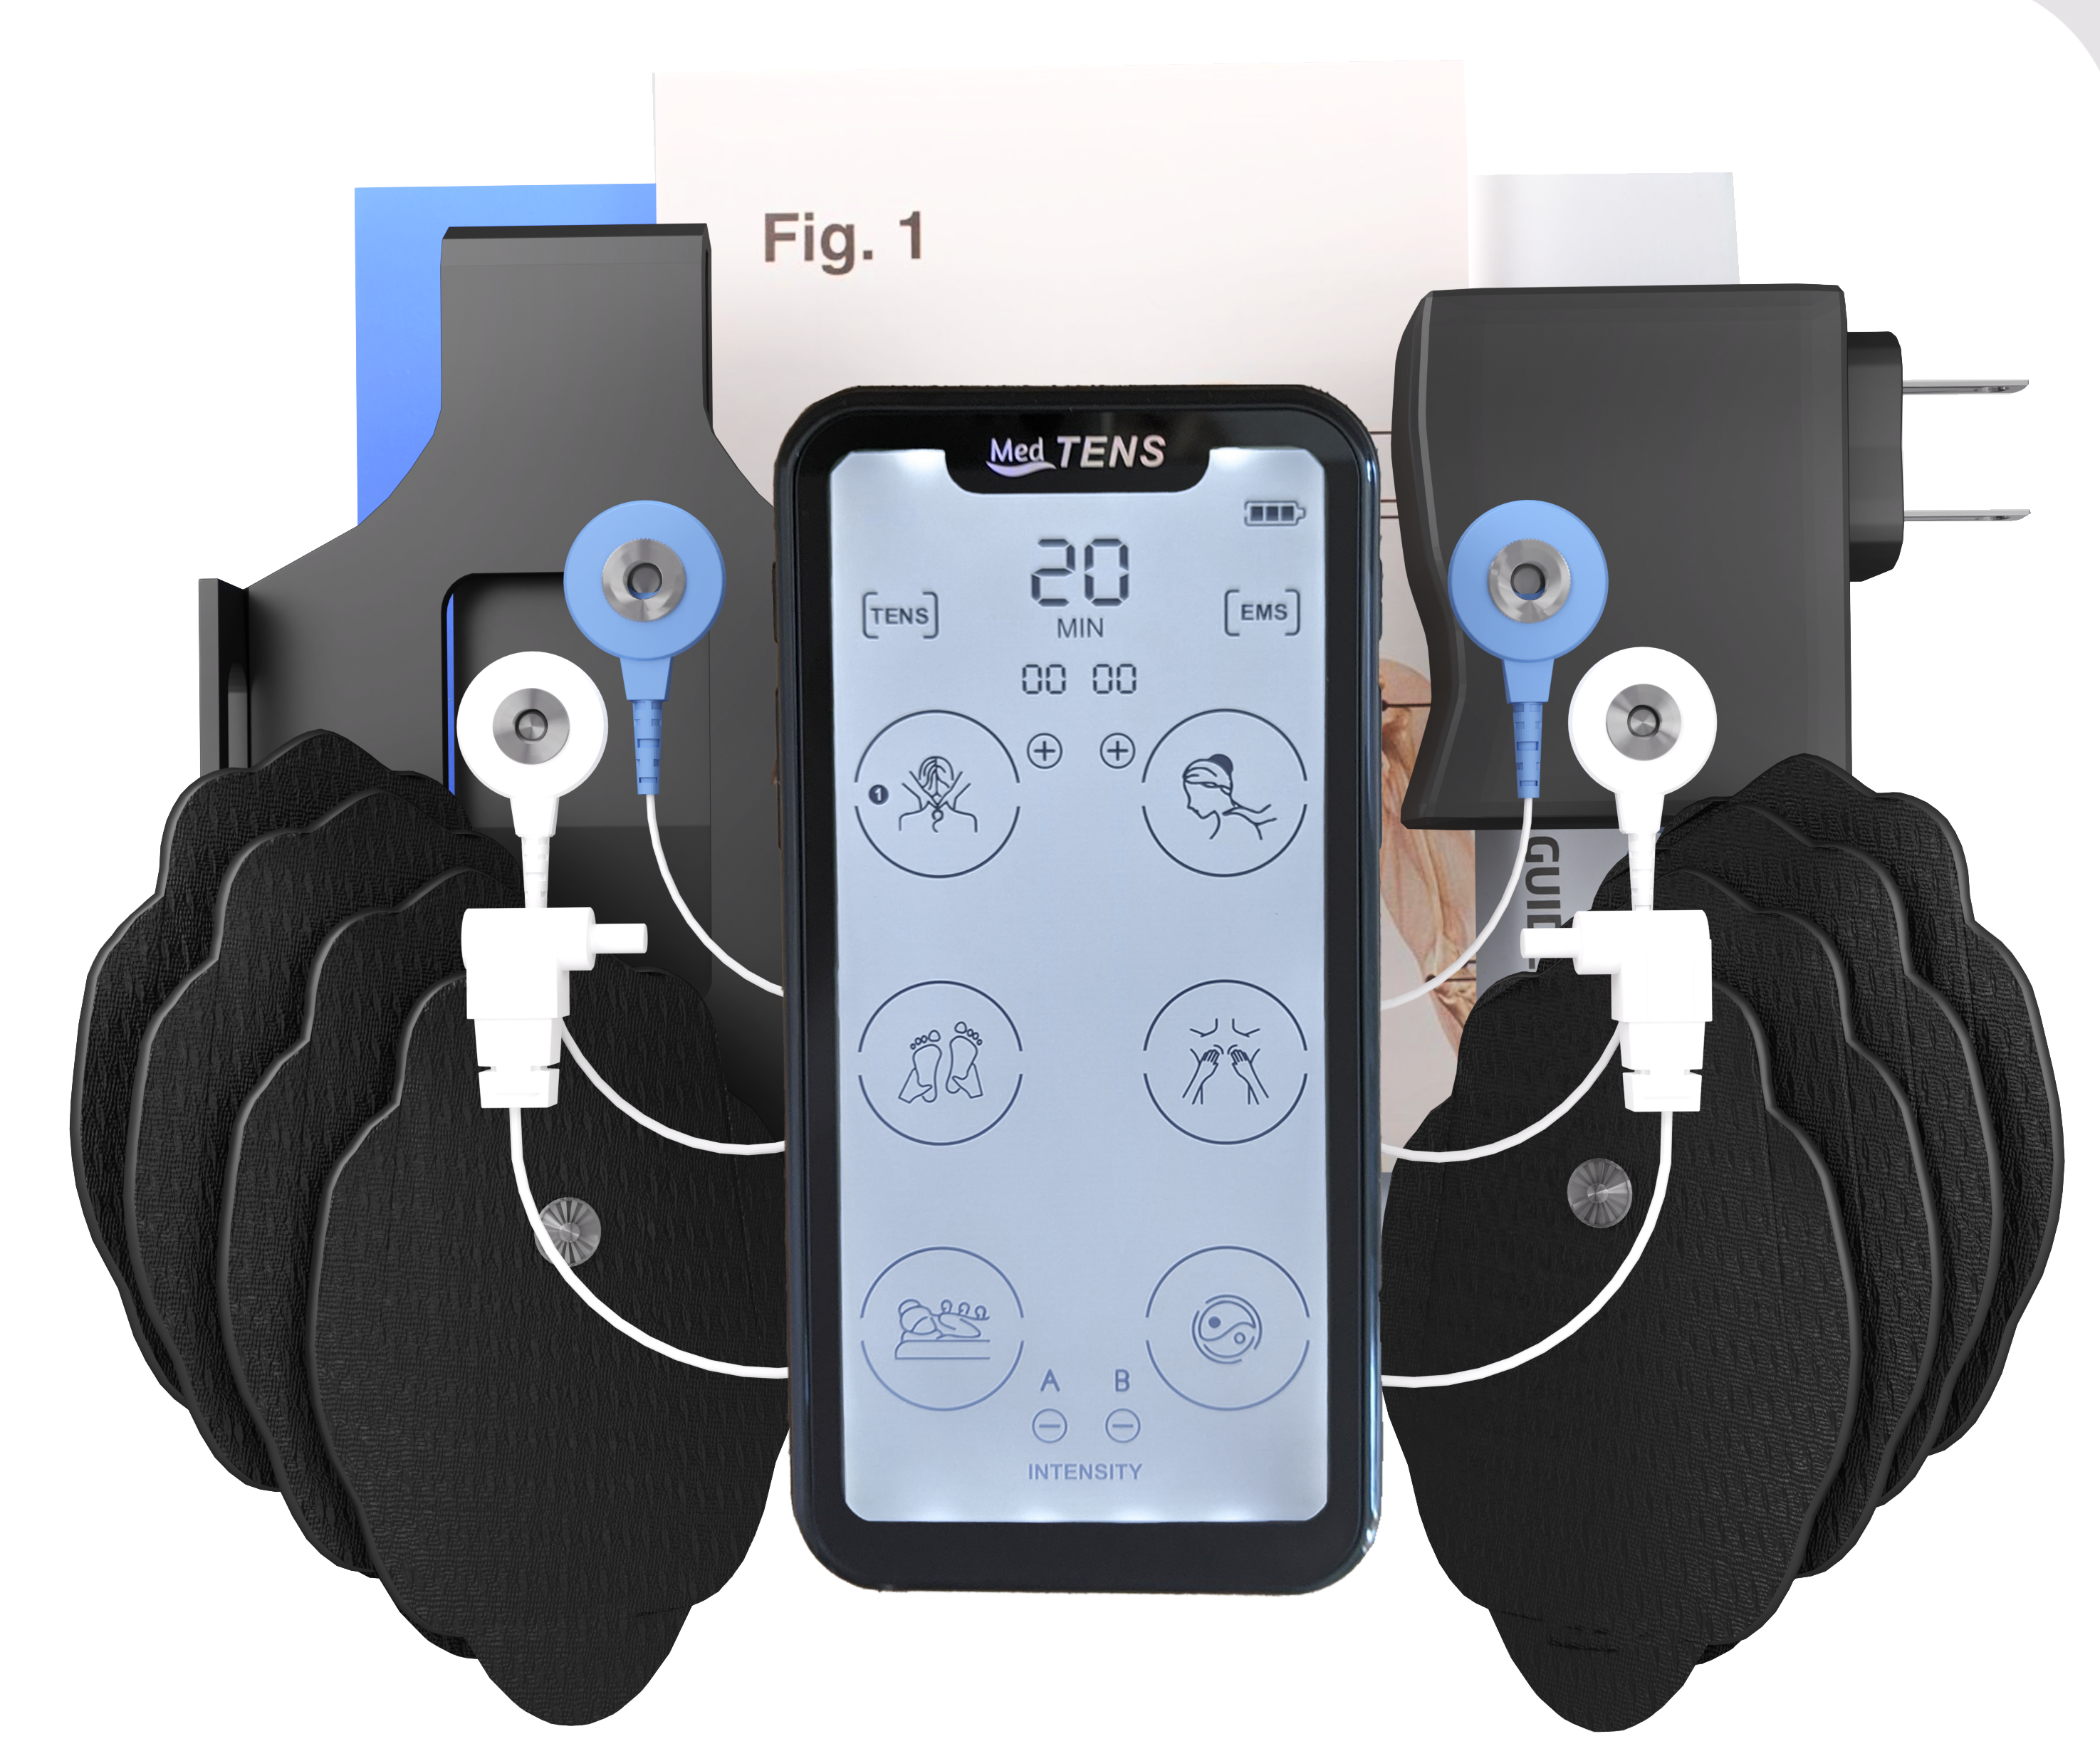 Best Feature-Rich: Medvice Rechargeable TENS Unit Muscle